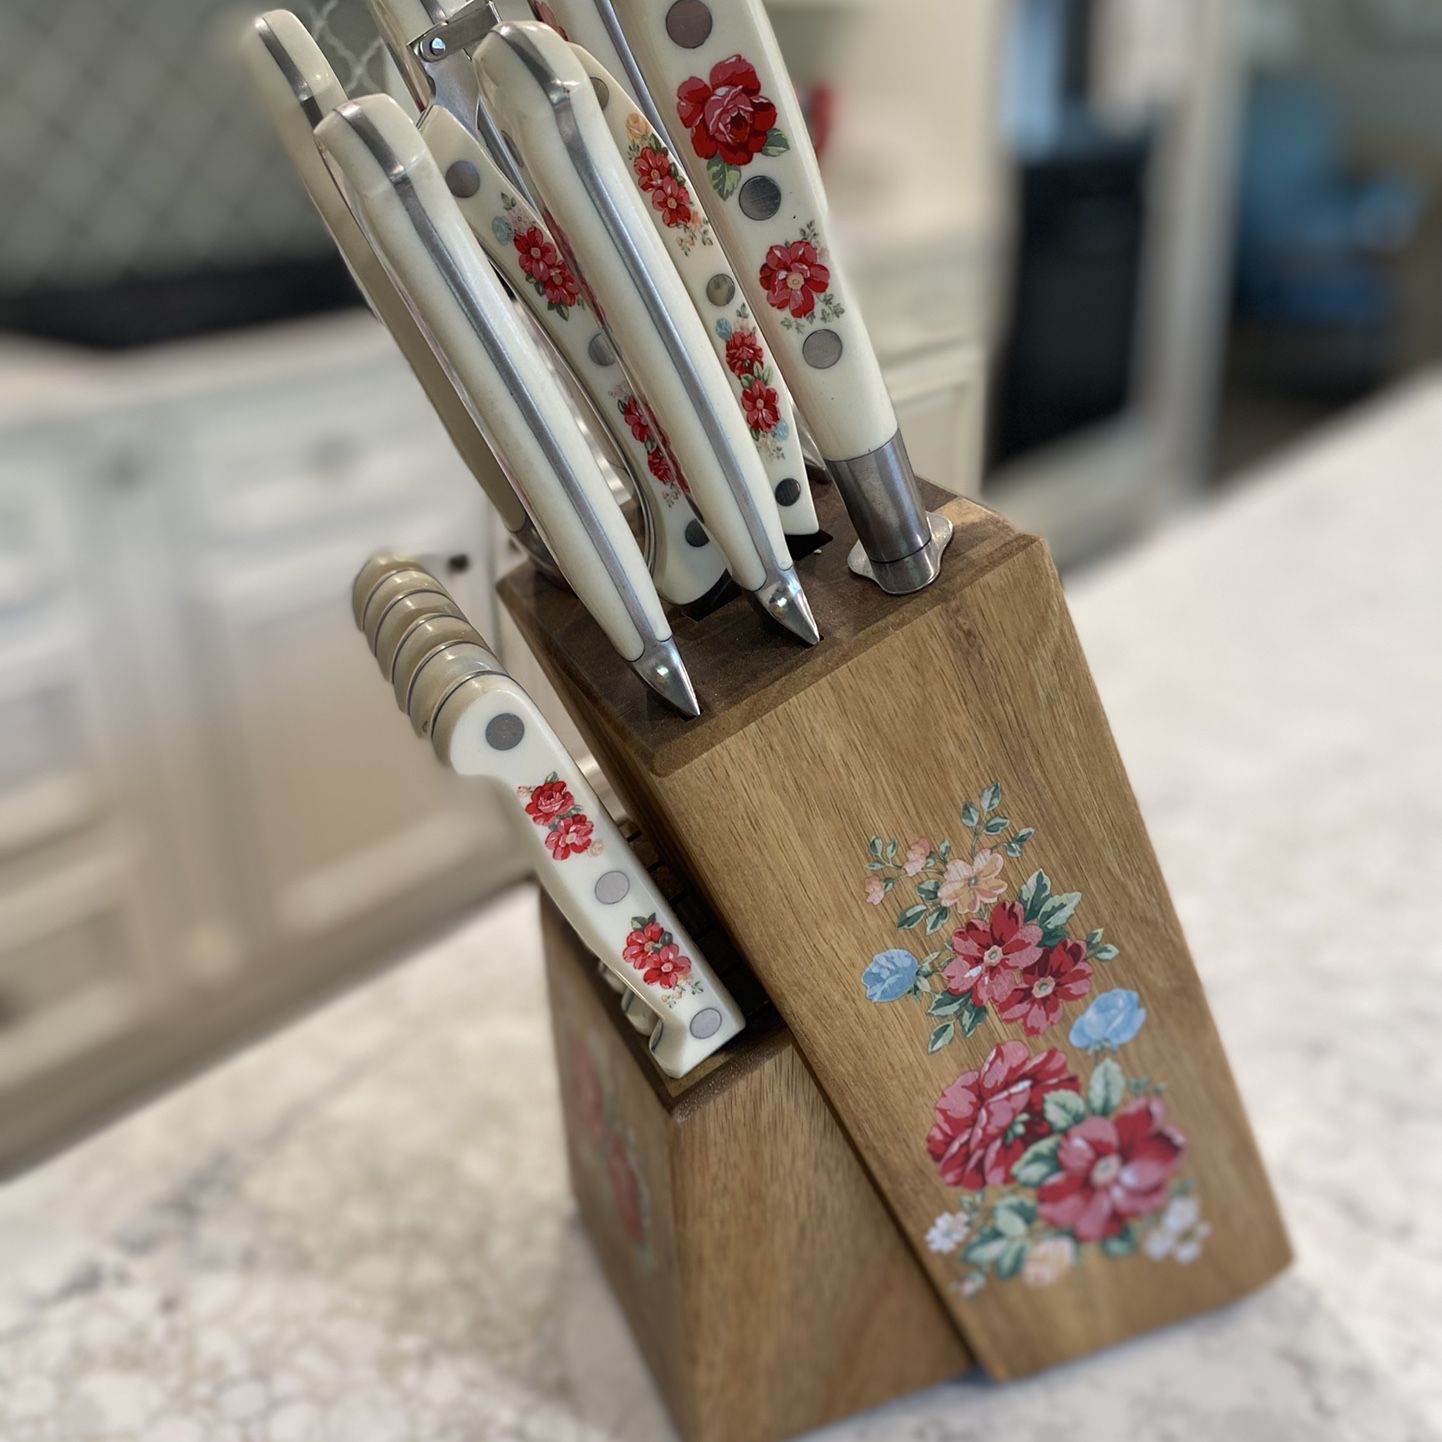 Cuisinart Advantage Knife Set for Sale in Dundee, FL - OfferUp